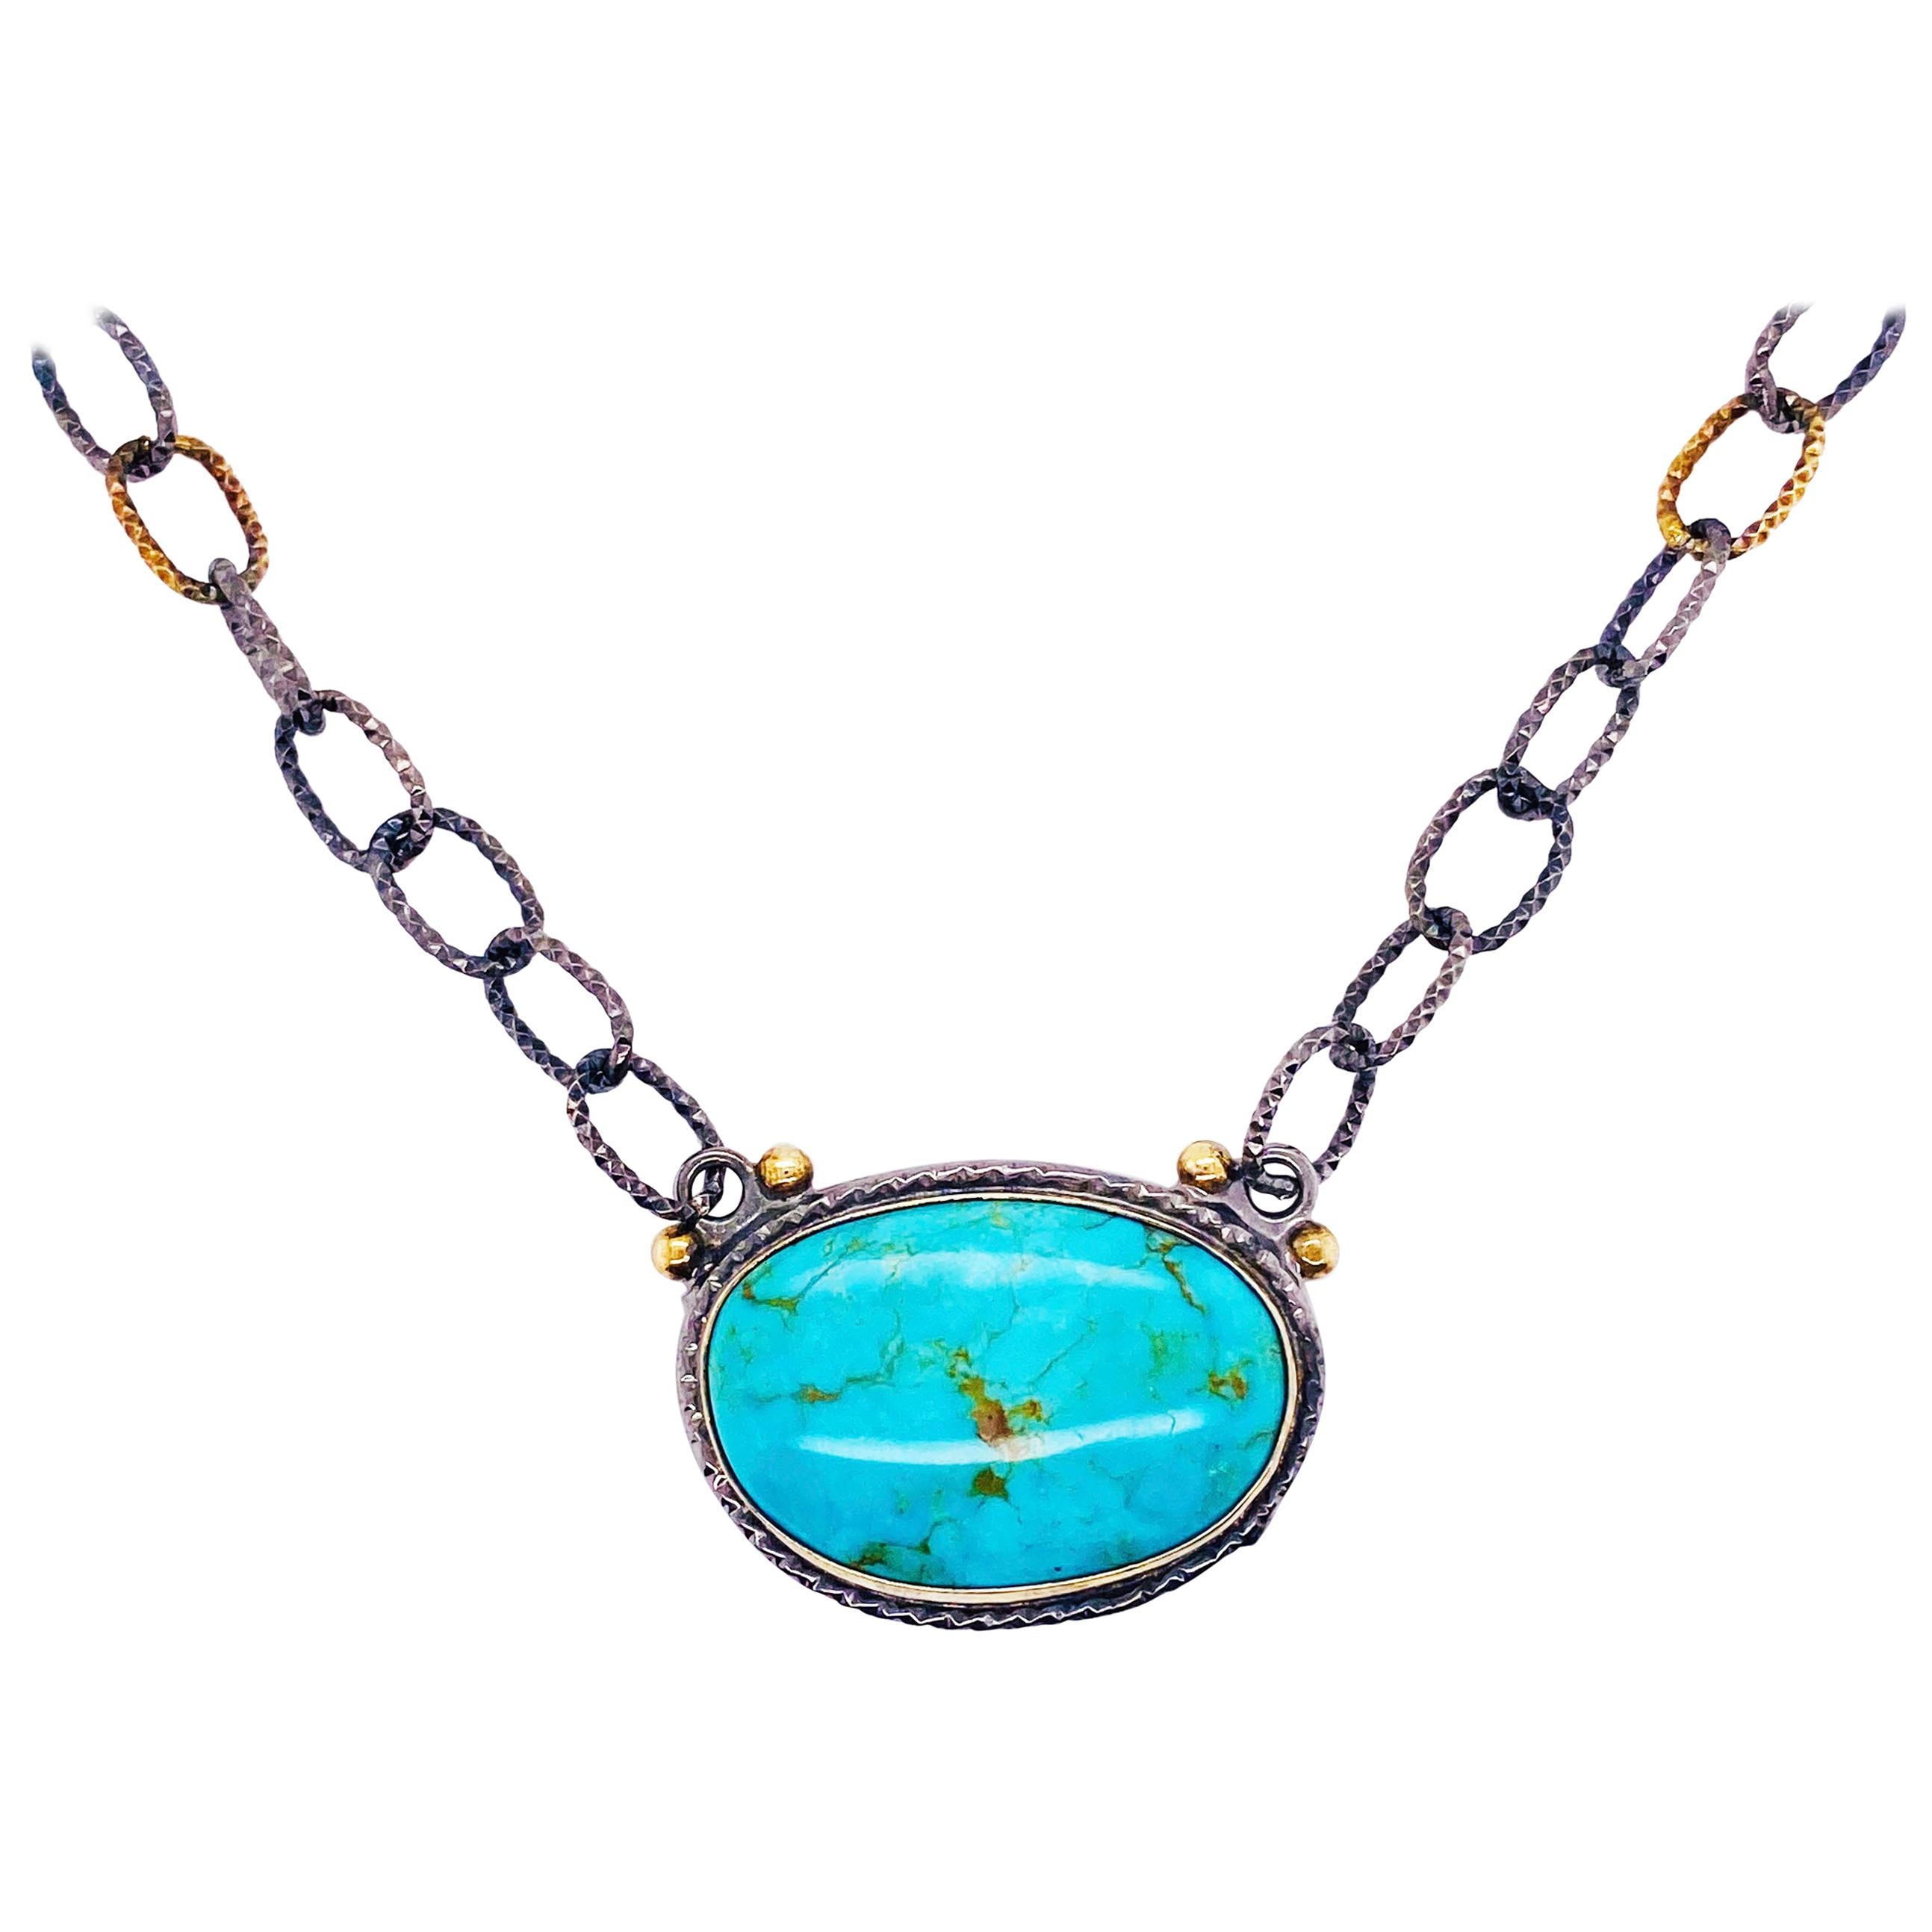 Turquoise Statement Necklace in Sterling Silver Bezel and Handmade Chain